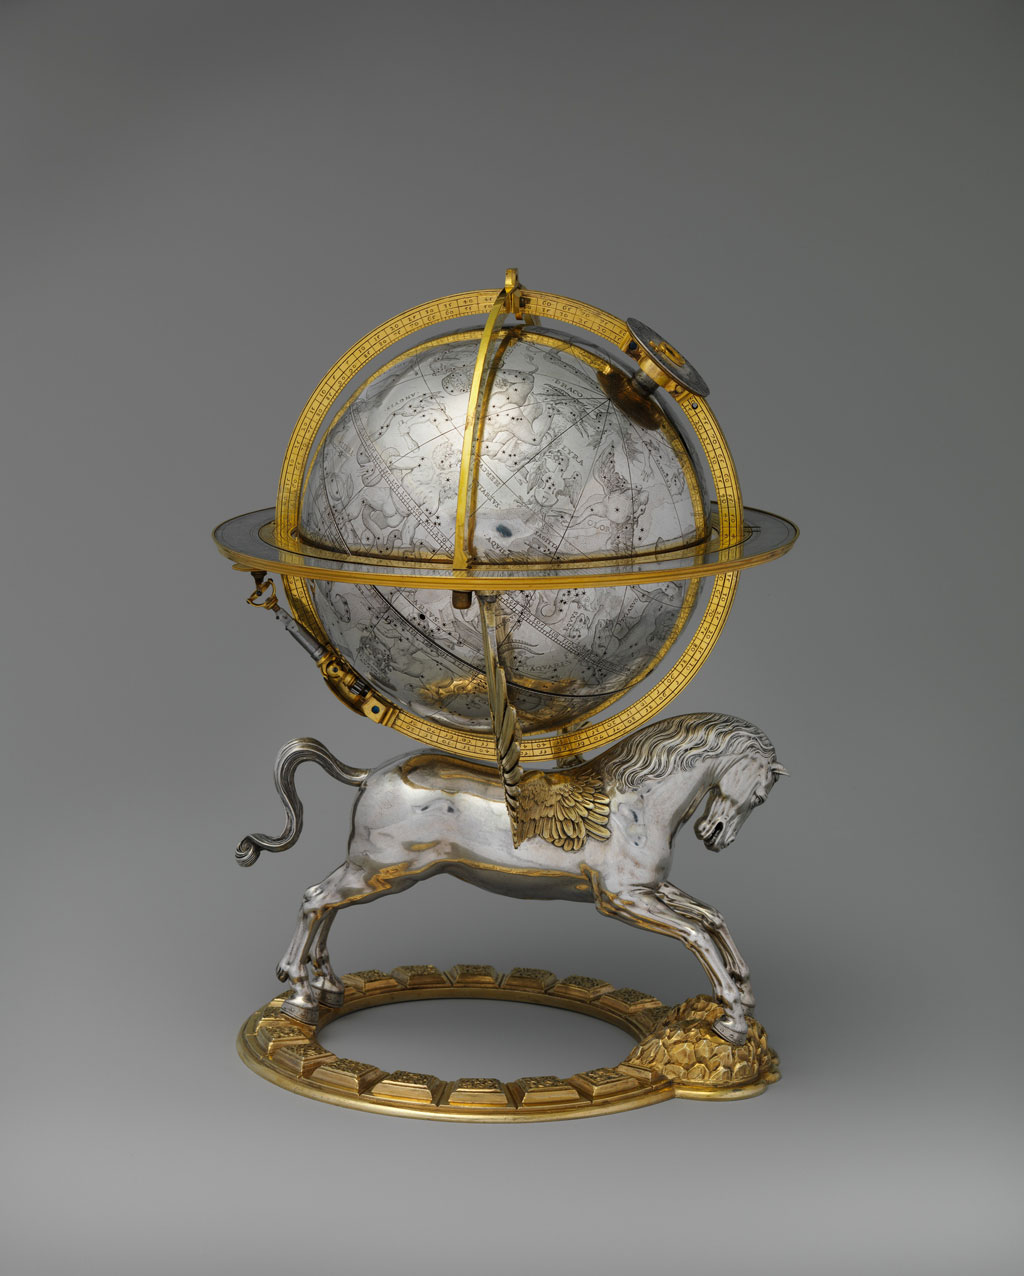 highlights from the met's collection (10)